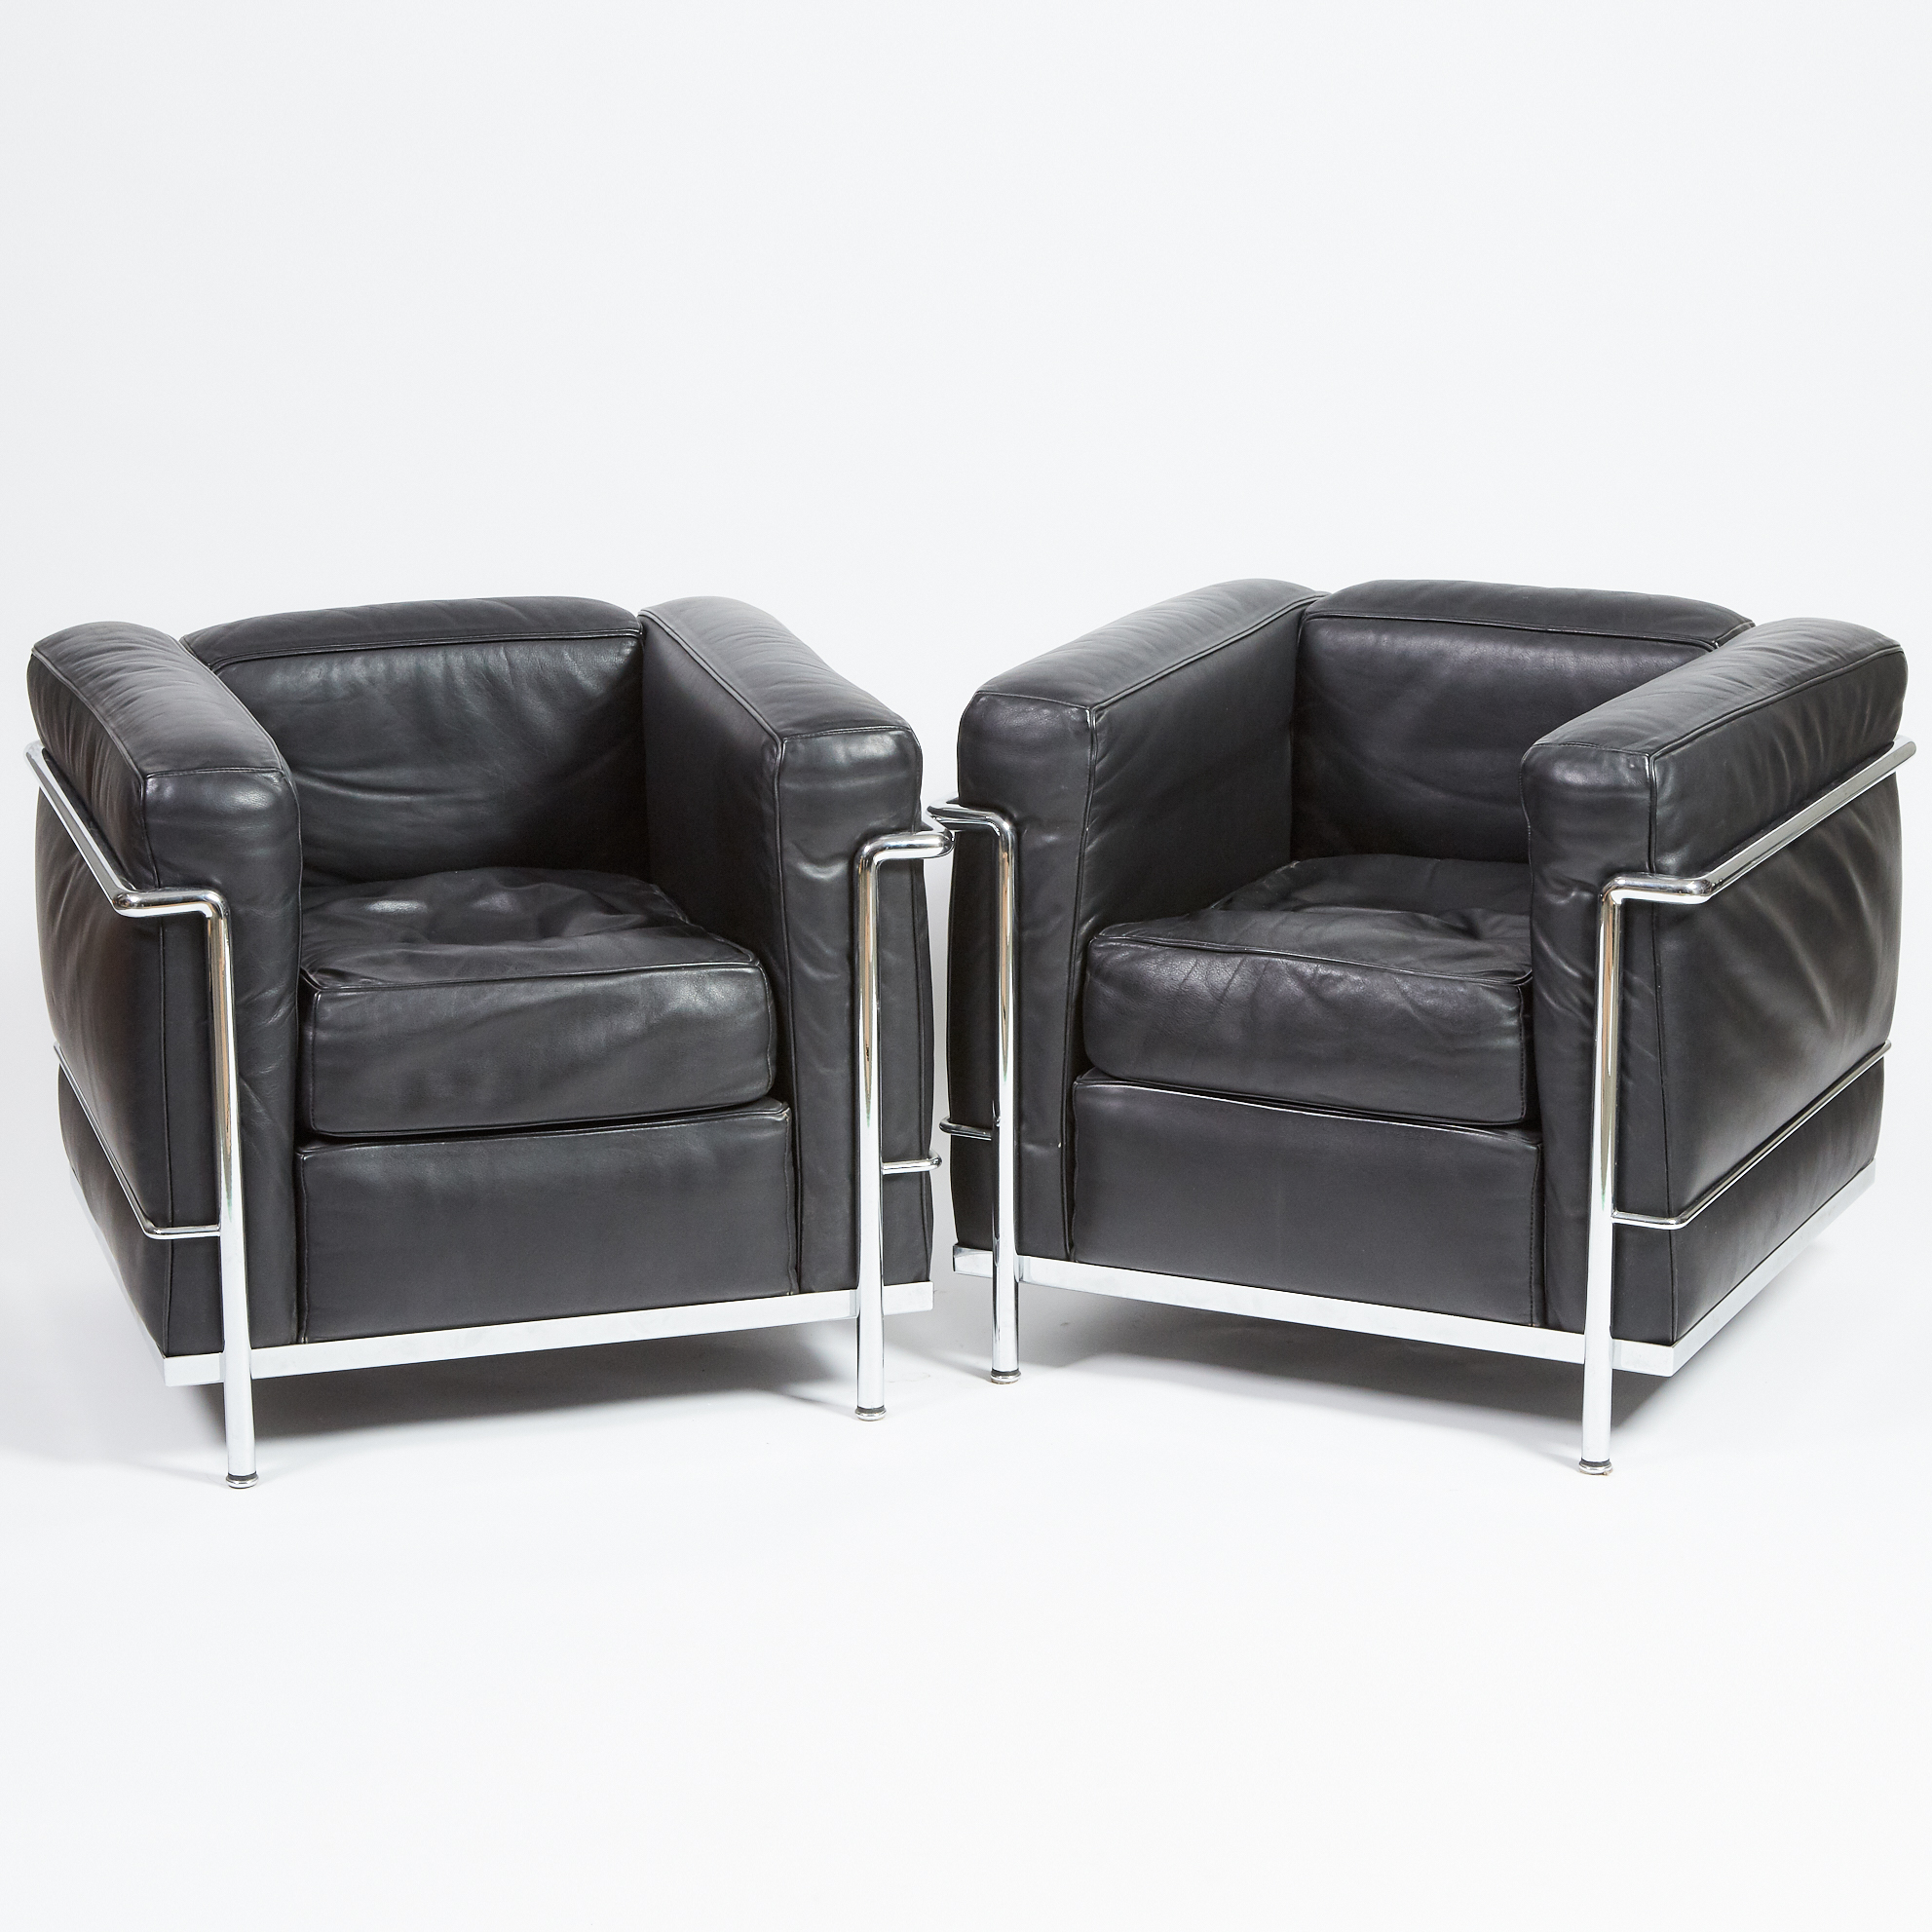 Pair of Le Corbusier LC2 'Poltrona' Arm Chairs by Cassina, Italy, c.1984